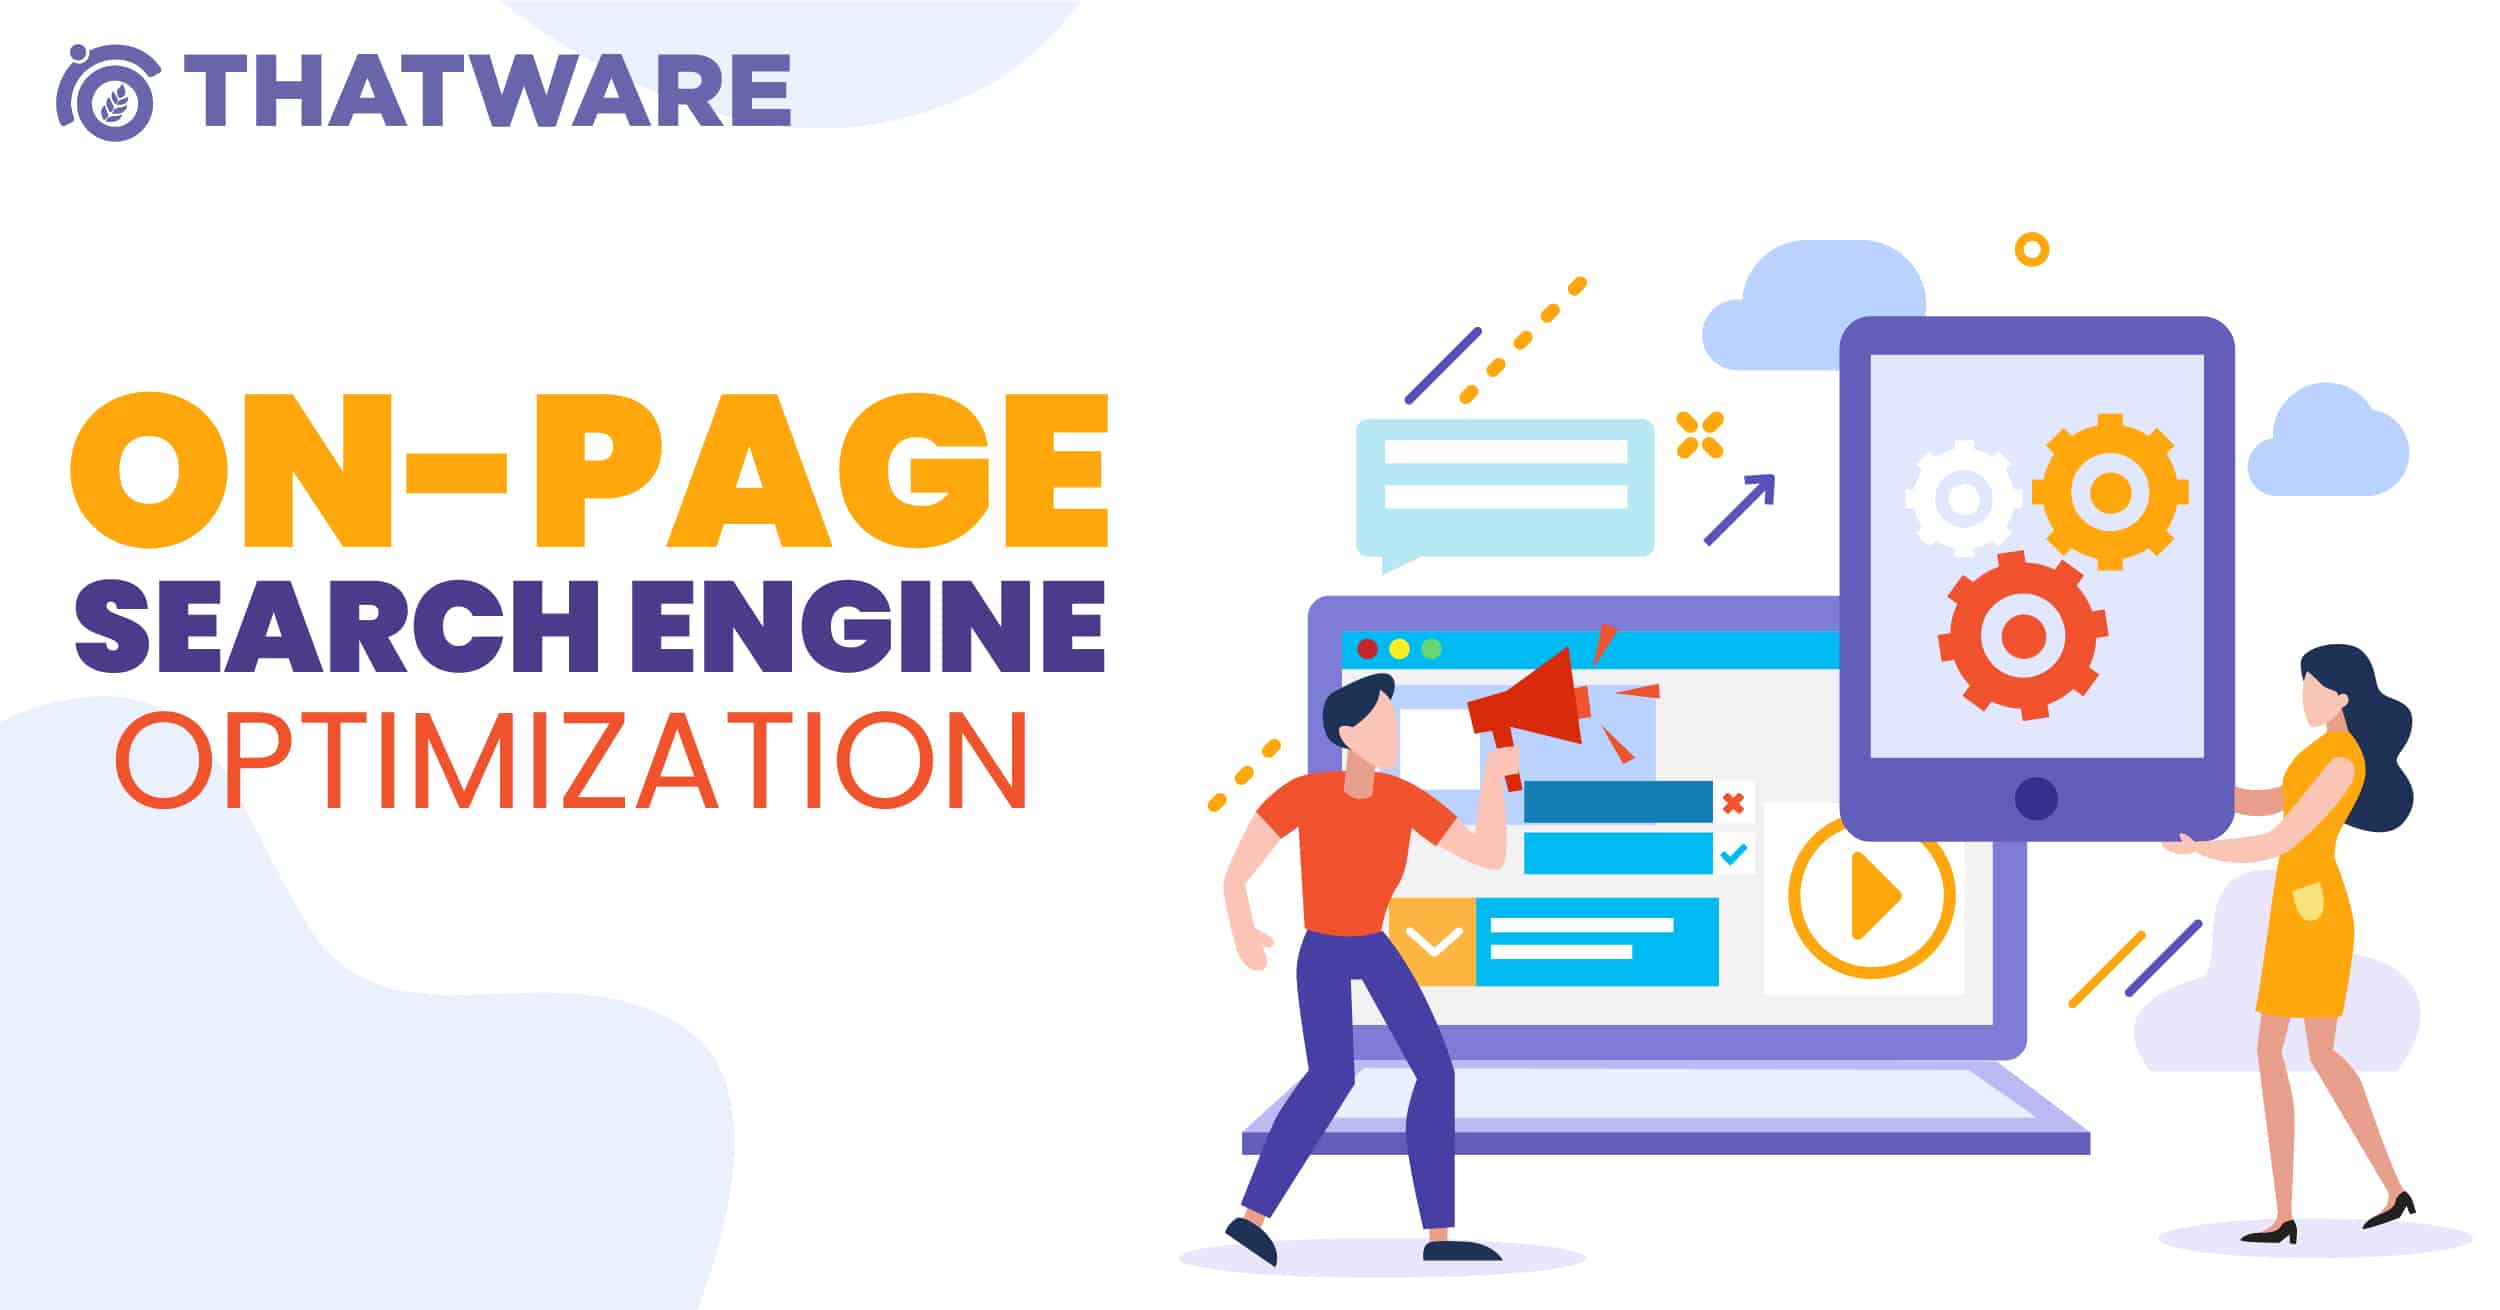 ON-PAGE SEARCH ENGINE OPTIMIZATION